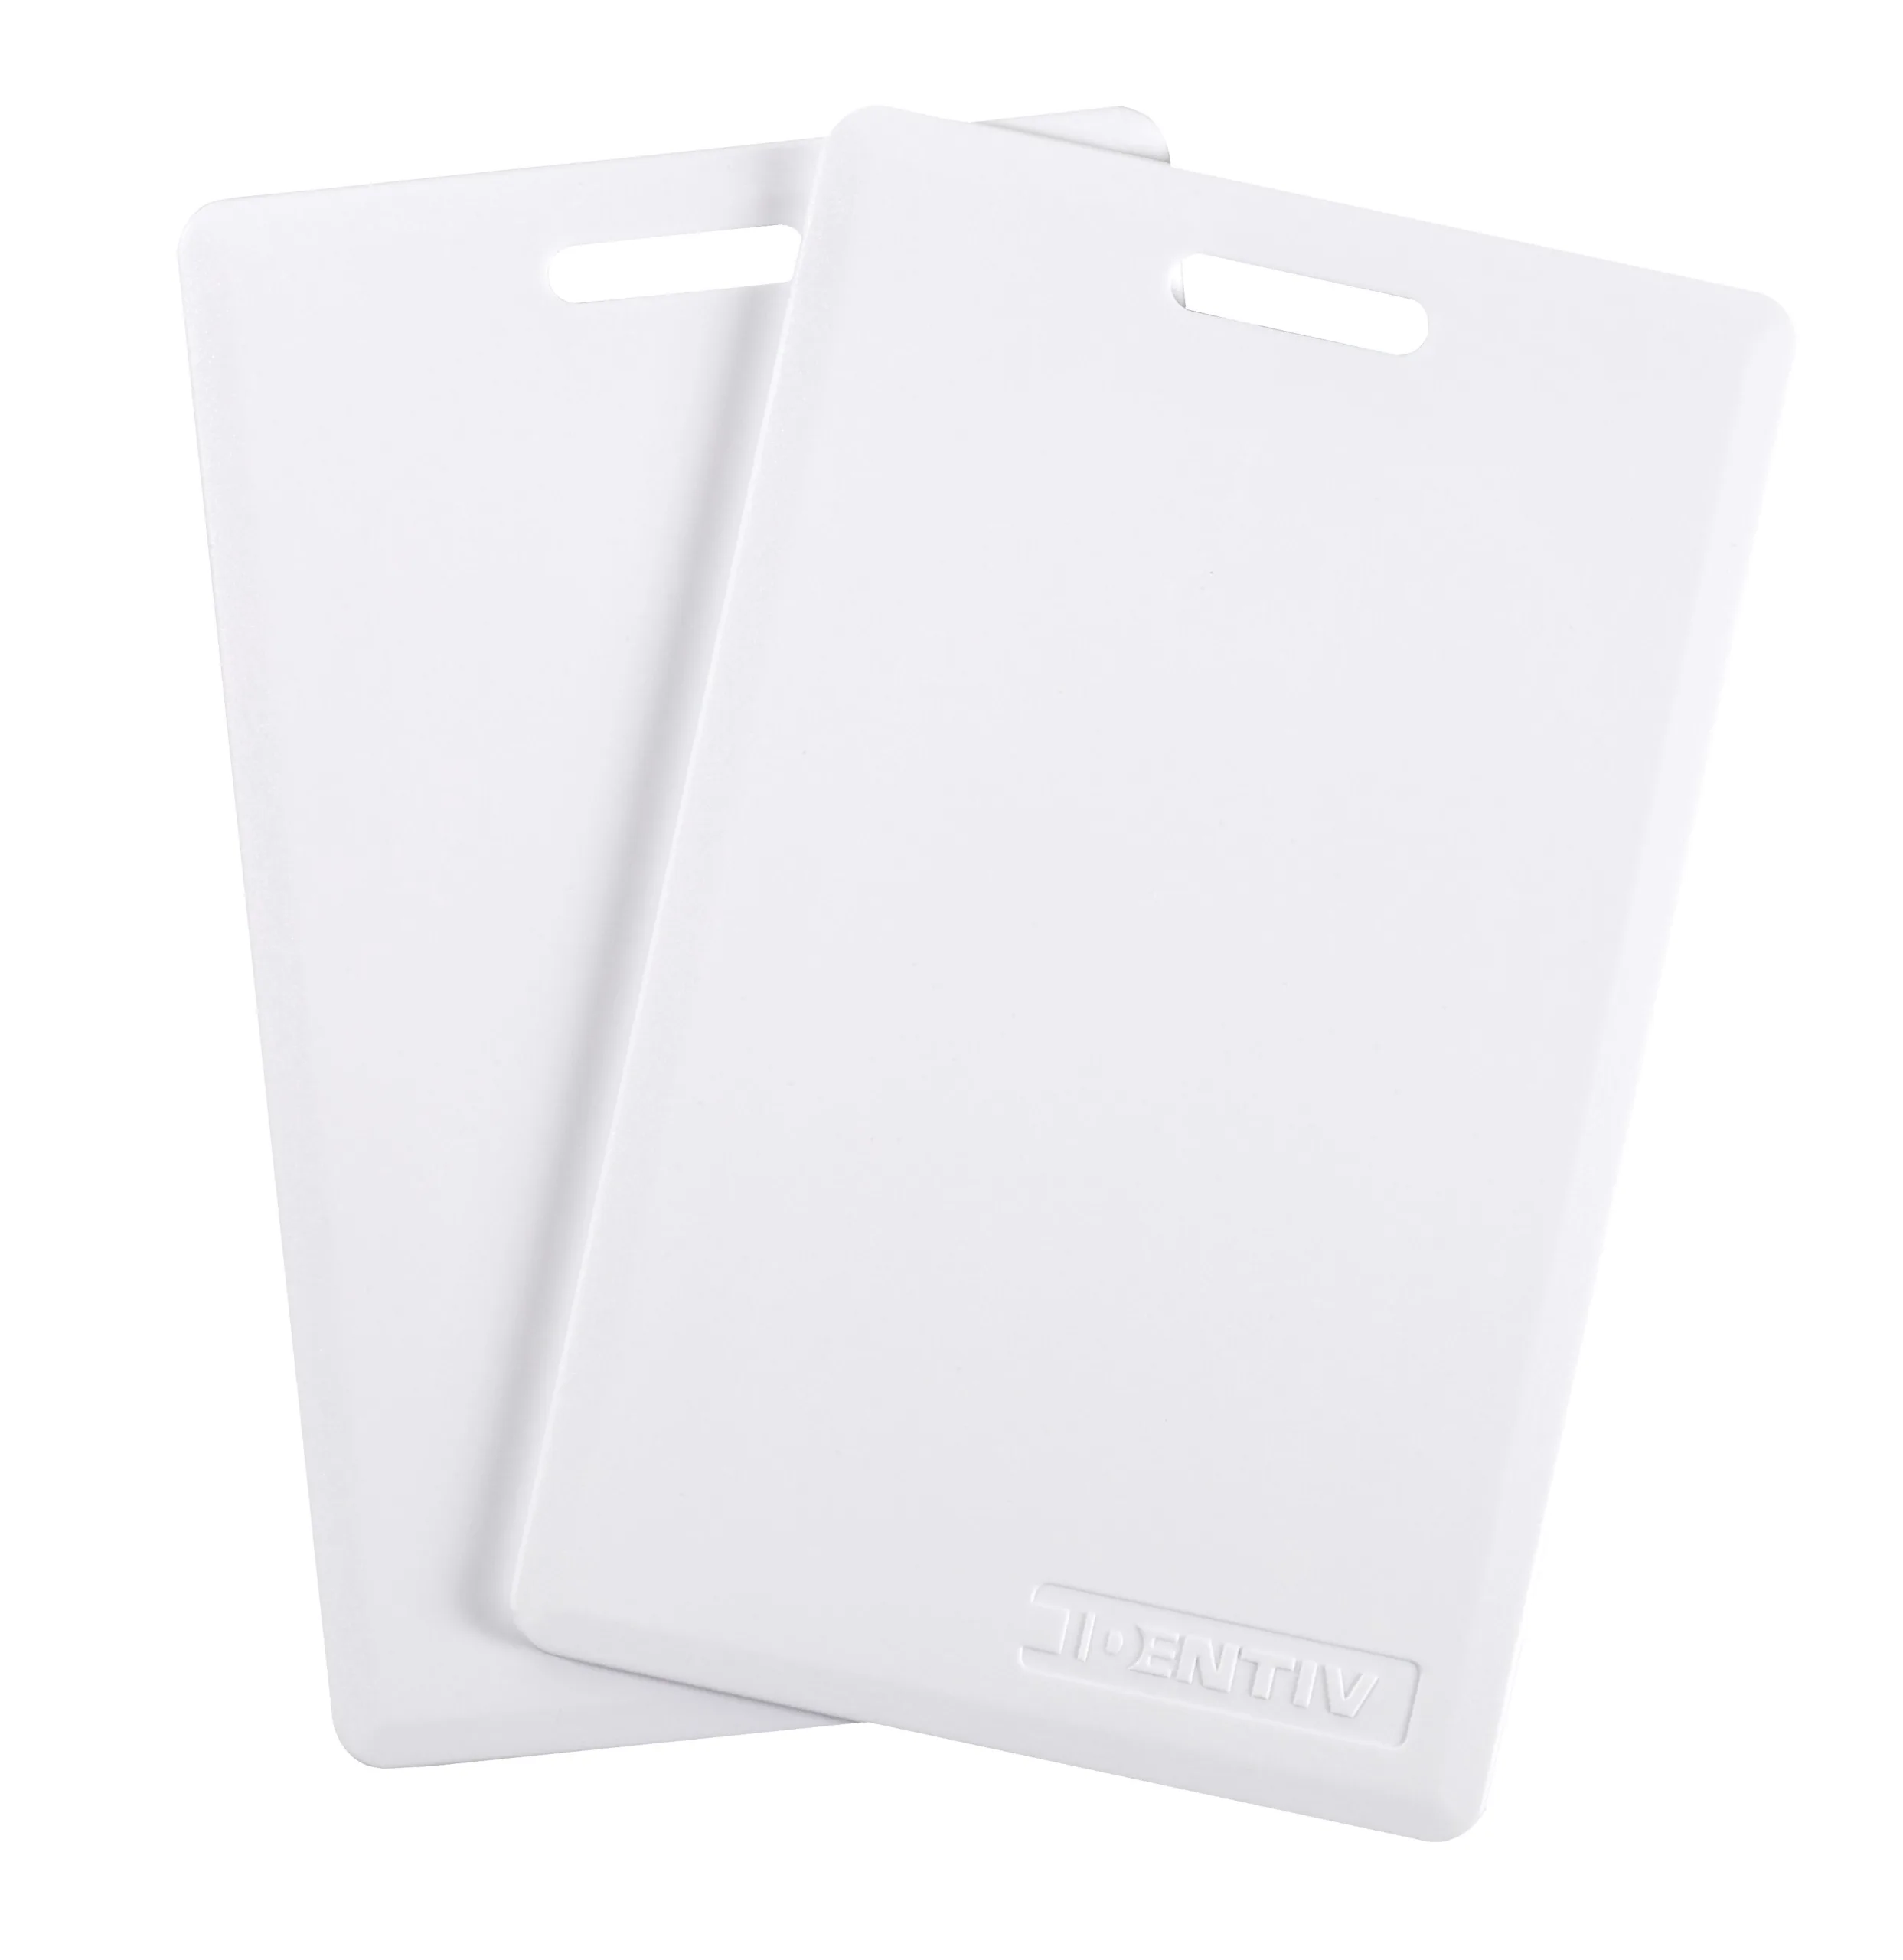 Identiv 4000 Proximity Clamshell Cards, Pack of 100